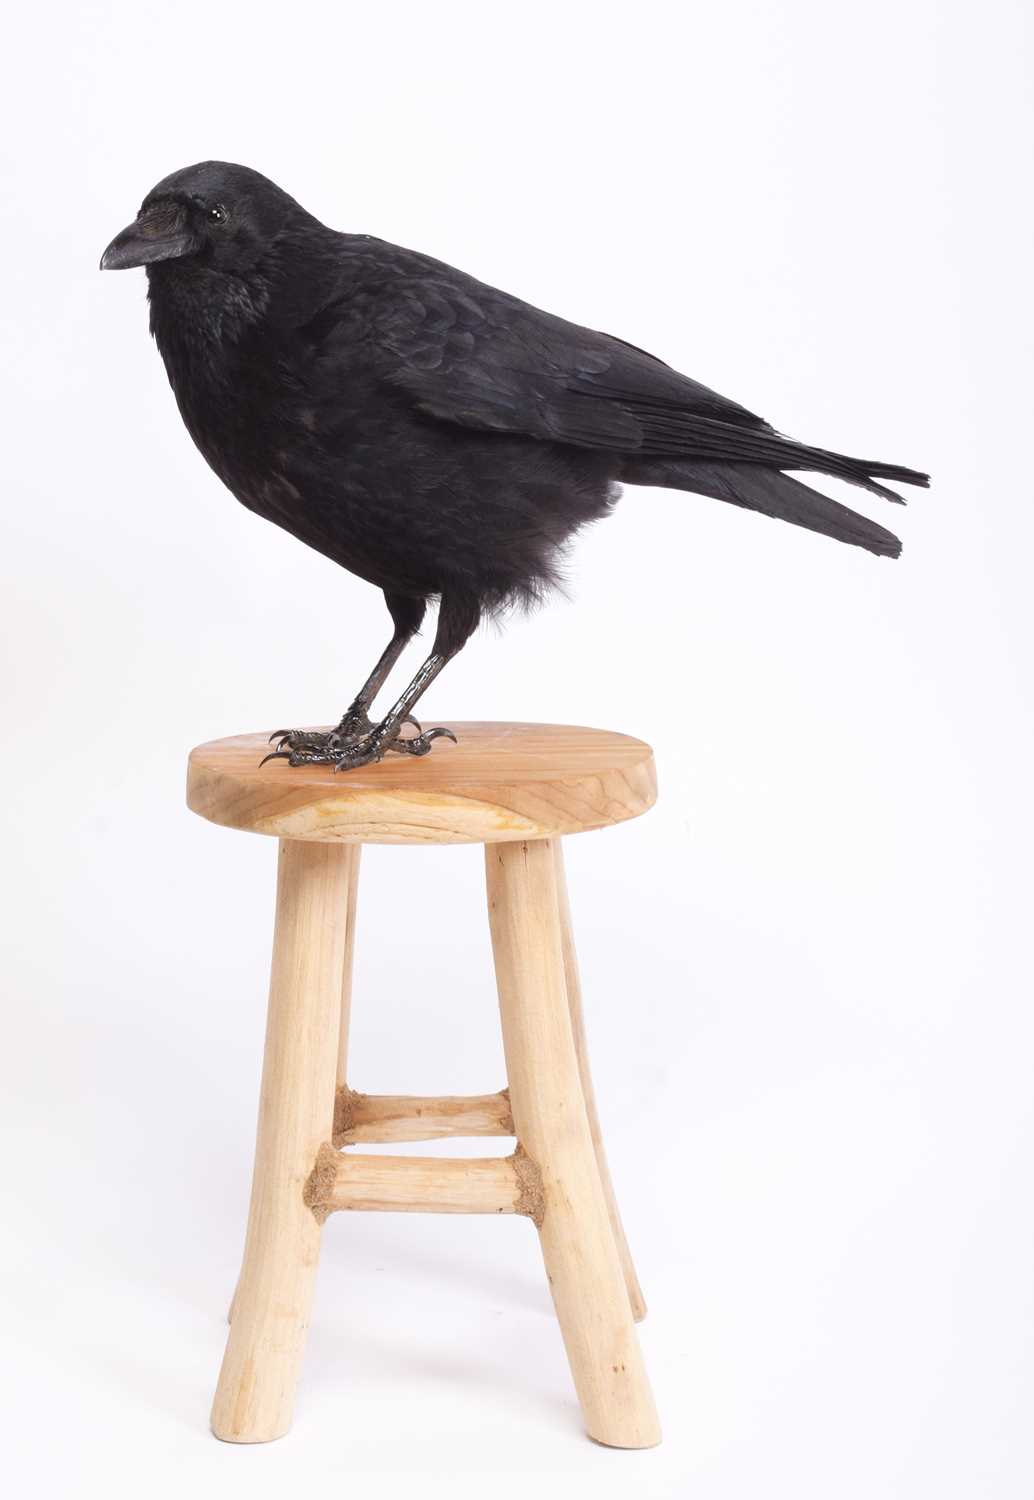 Taxidermy: A Carrion Crow on a Stool (Corvus carone), modern, by Adrian Johnstone, Taxidermy, - Image 2 of 2